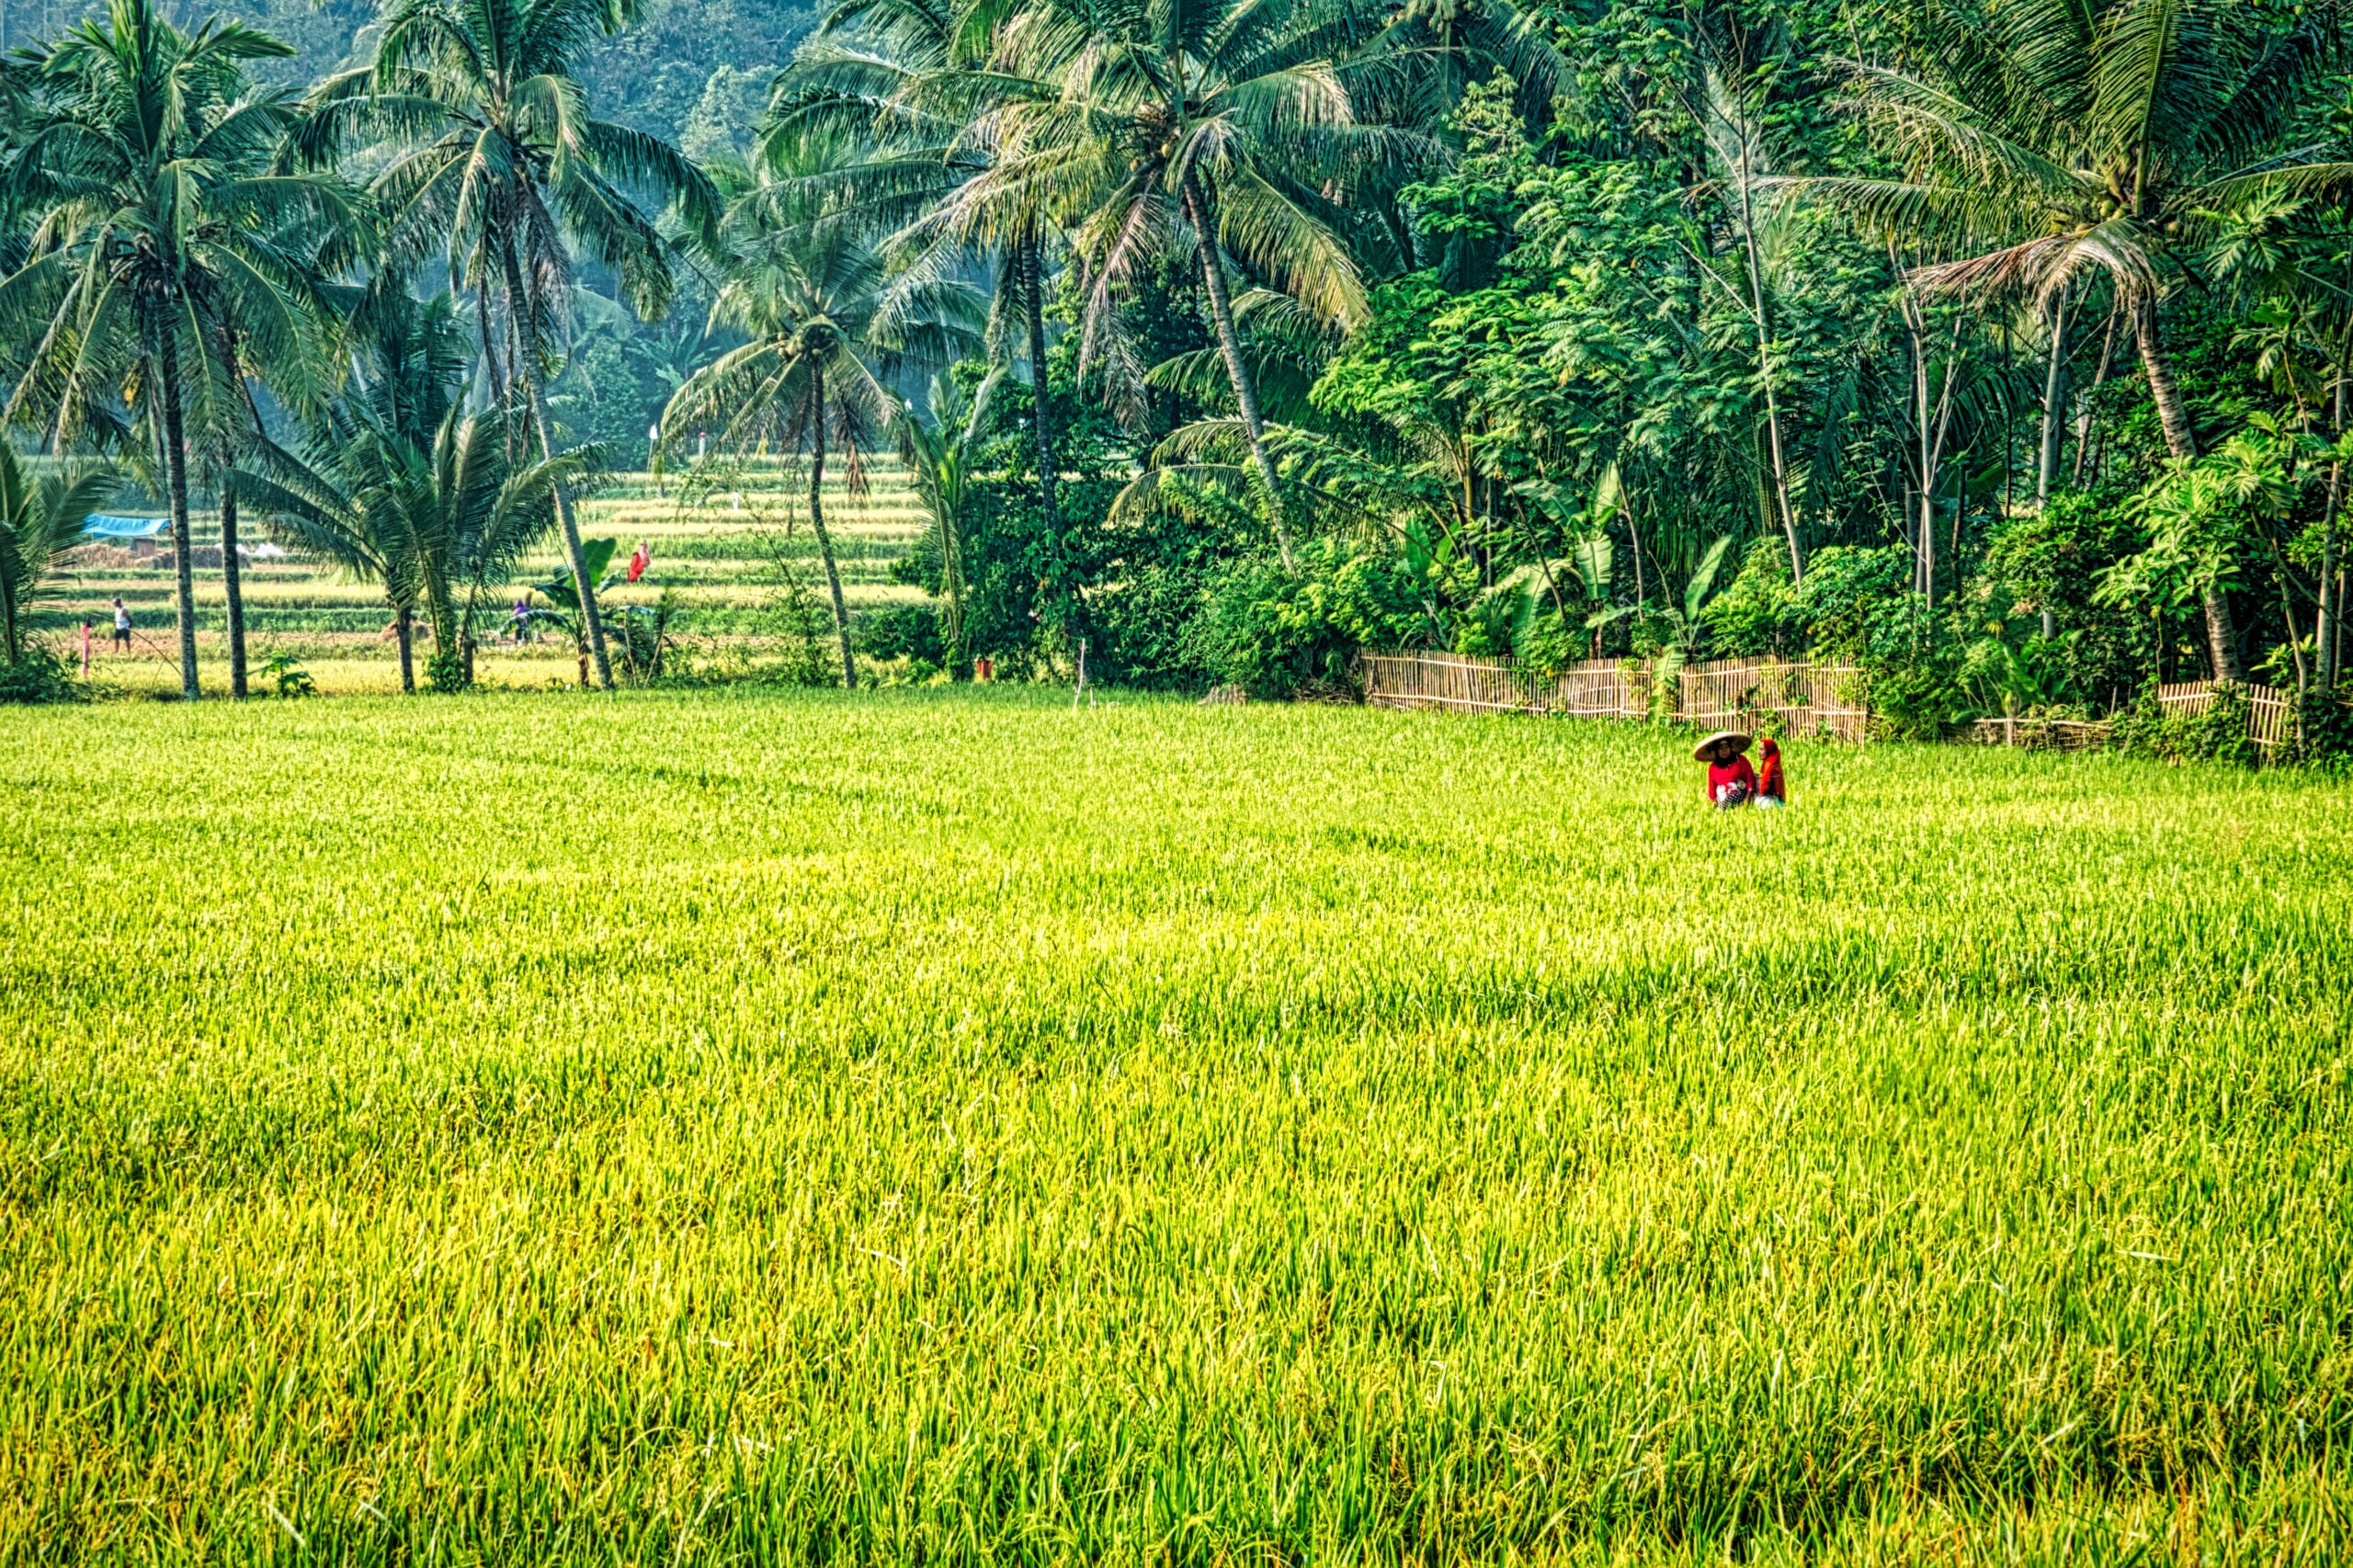 Mortgage of agricultural land in Vietnam for bank loans